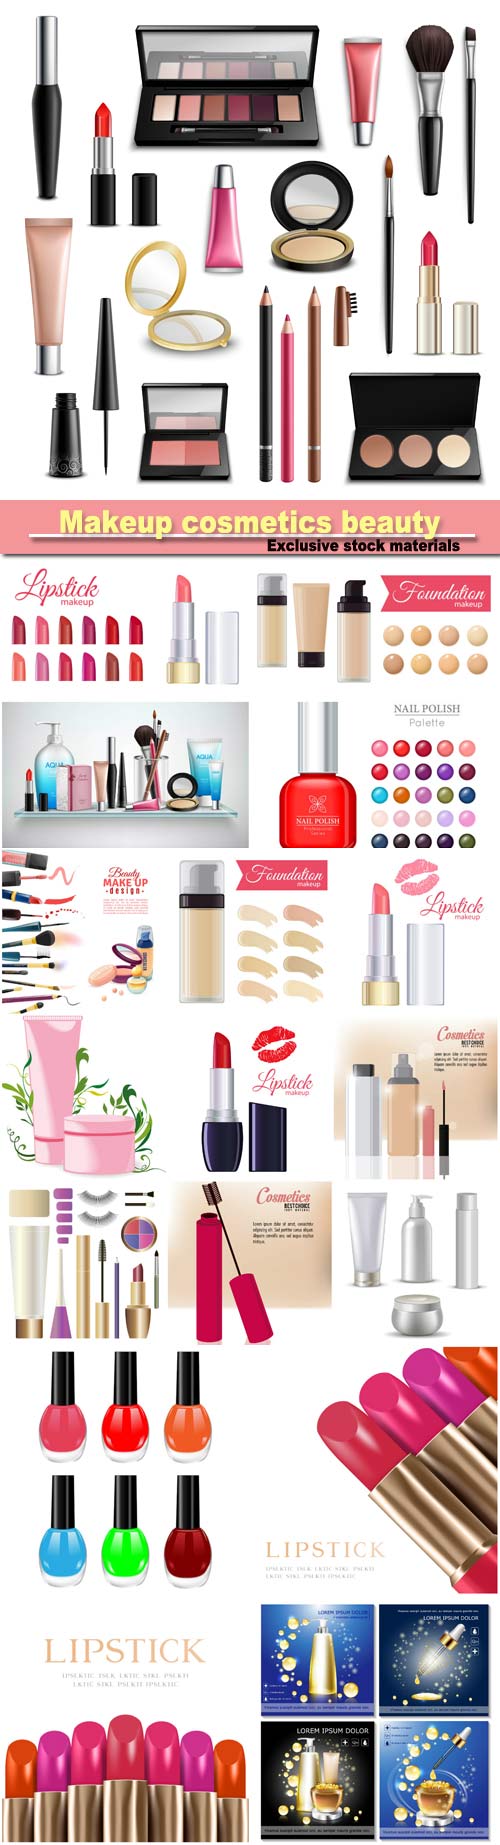 Makeup cosmetics beauty, collection with lip gloss compact powder and eyeliner